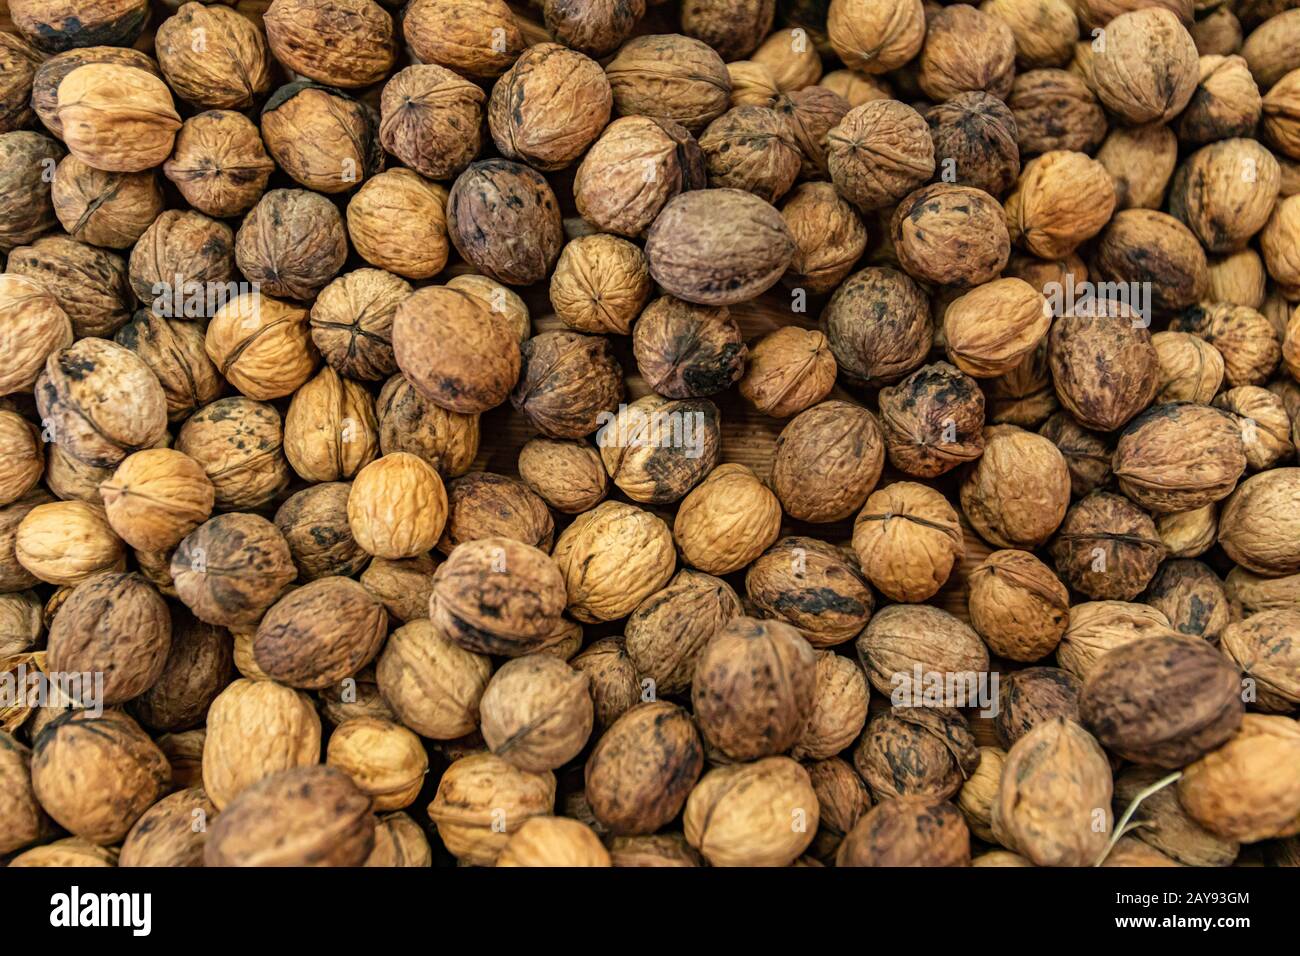 Natural food patterns and geometries. Full frame close up of fresh, dried walnuts full of nutrients. Selective focus. Wallpaper or background use. Stock Photo